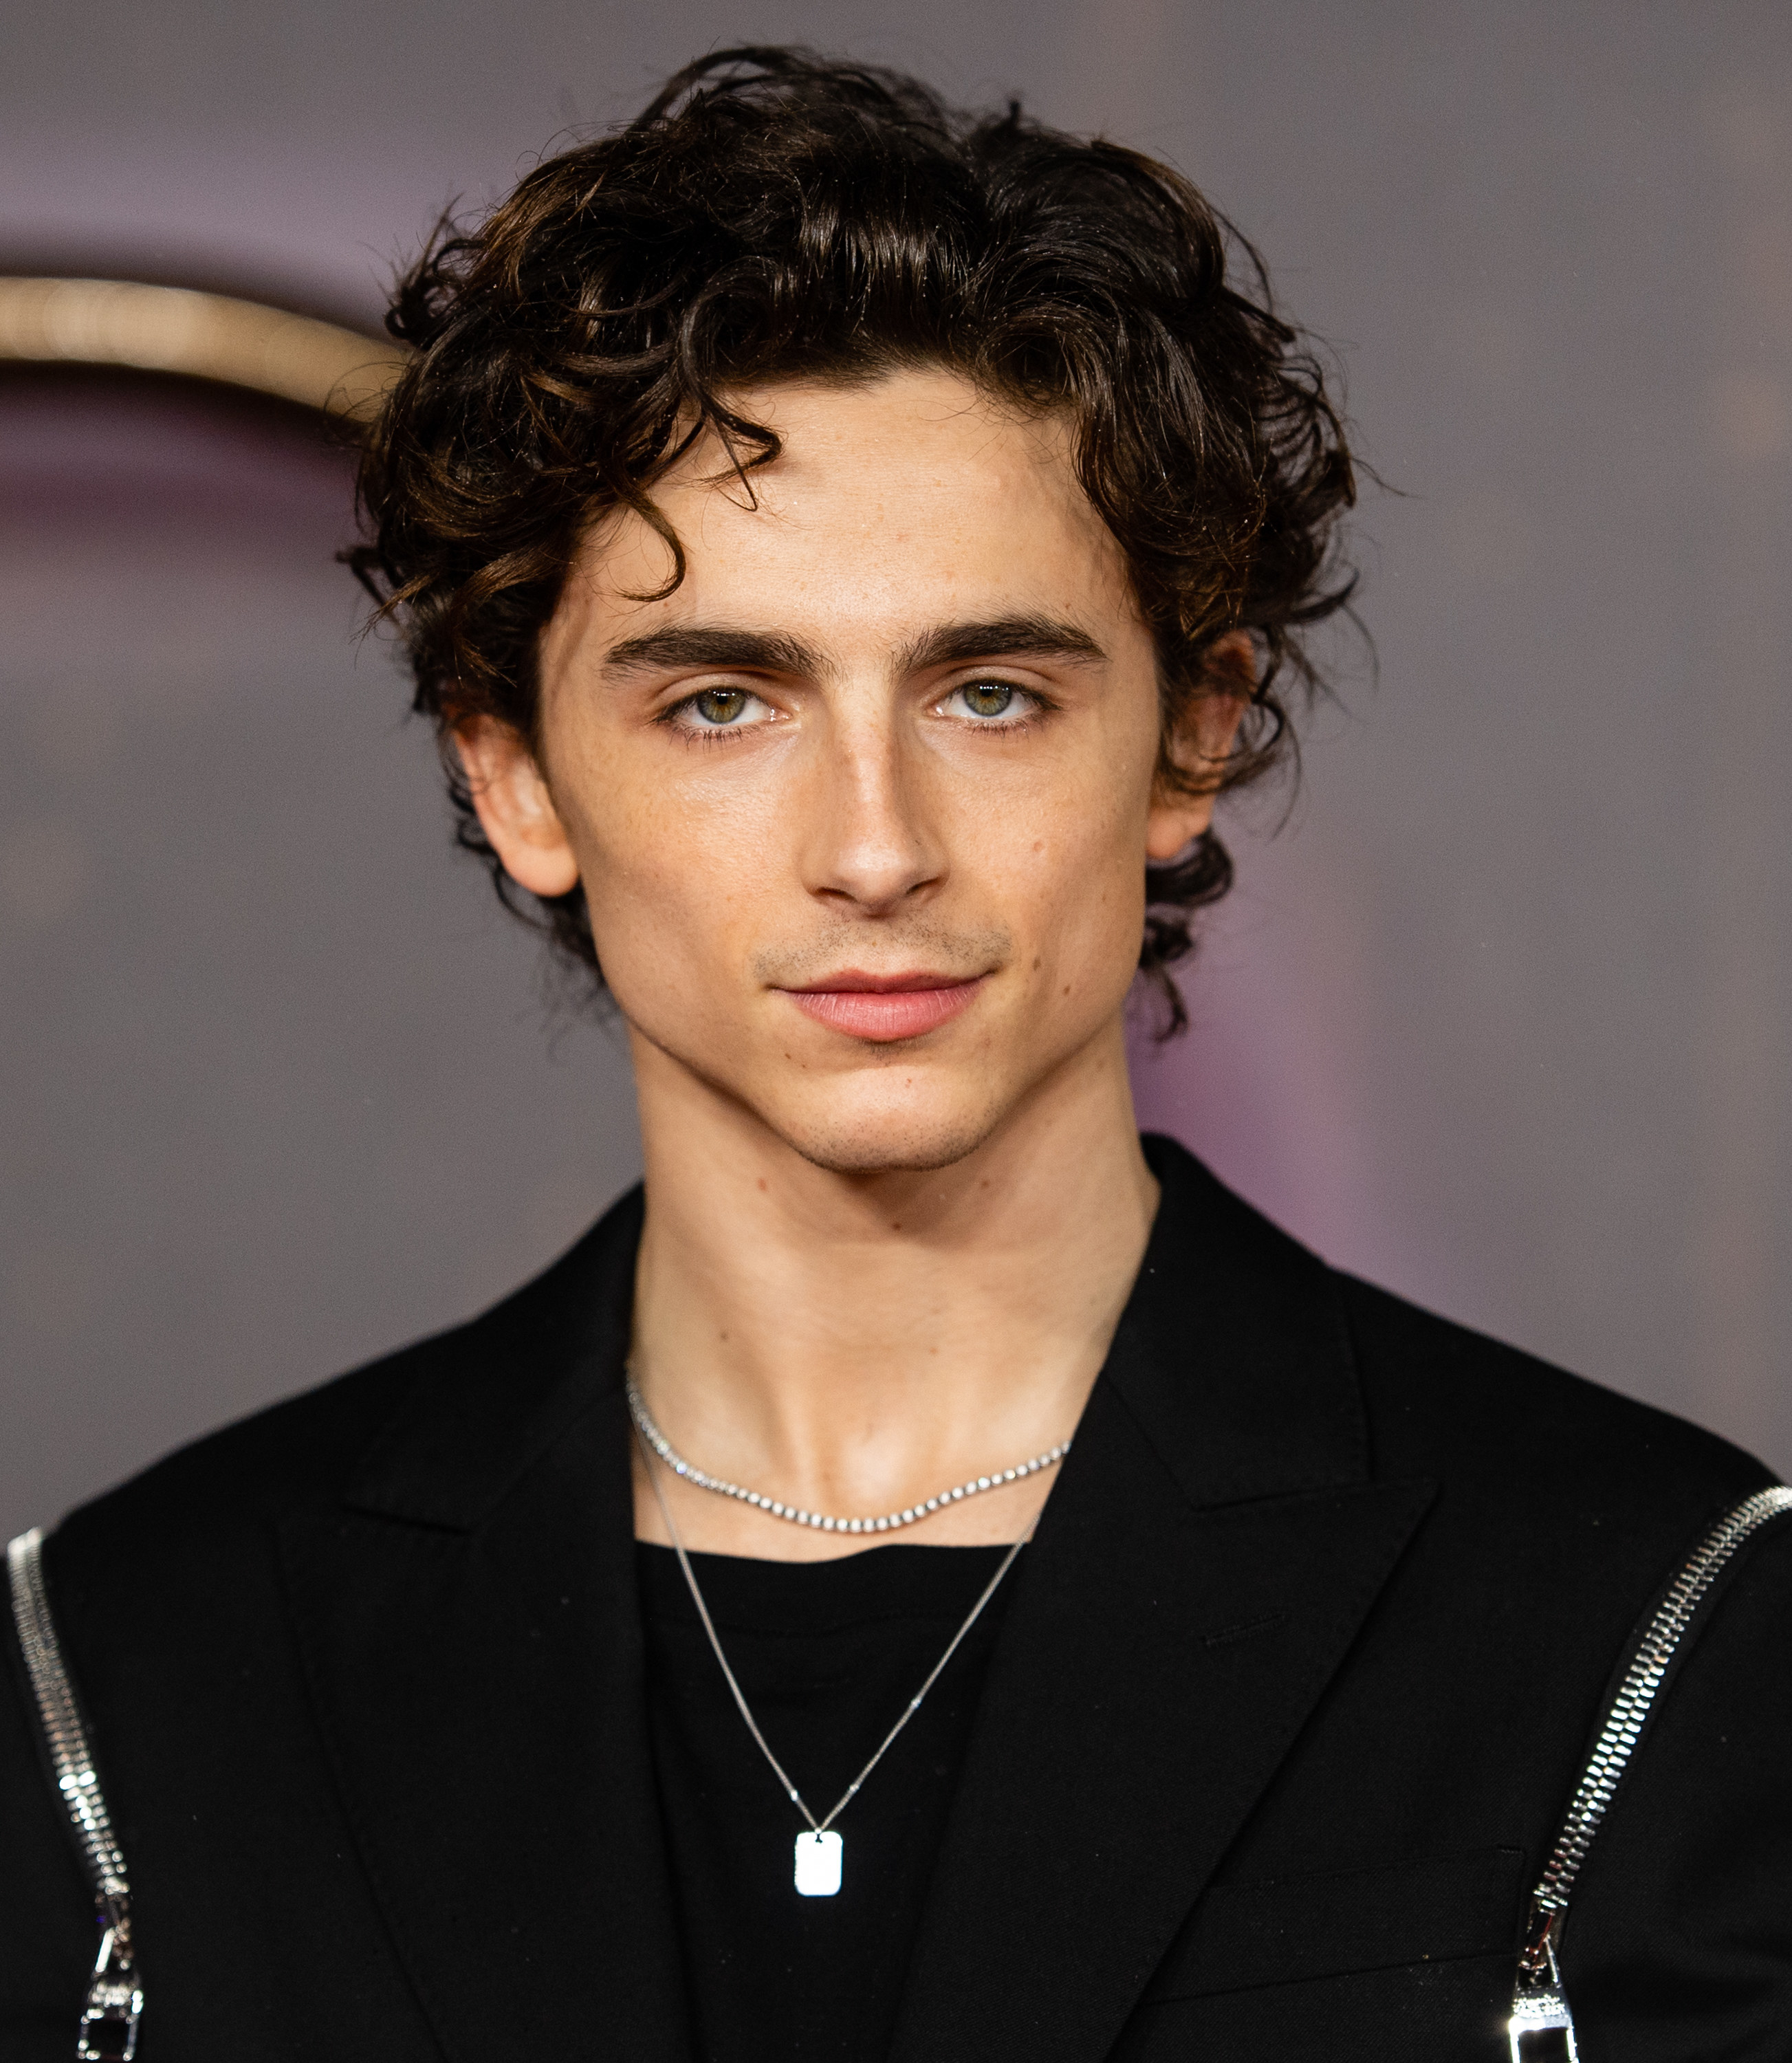 Timmy in a black jacket on a red carpet